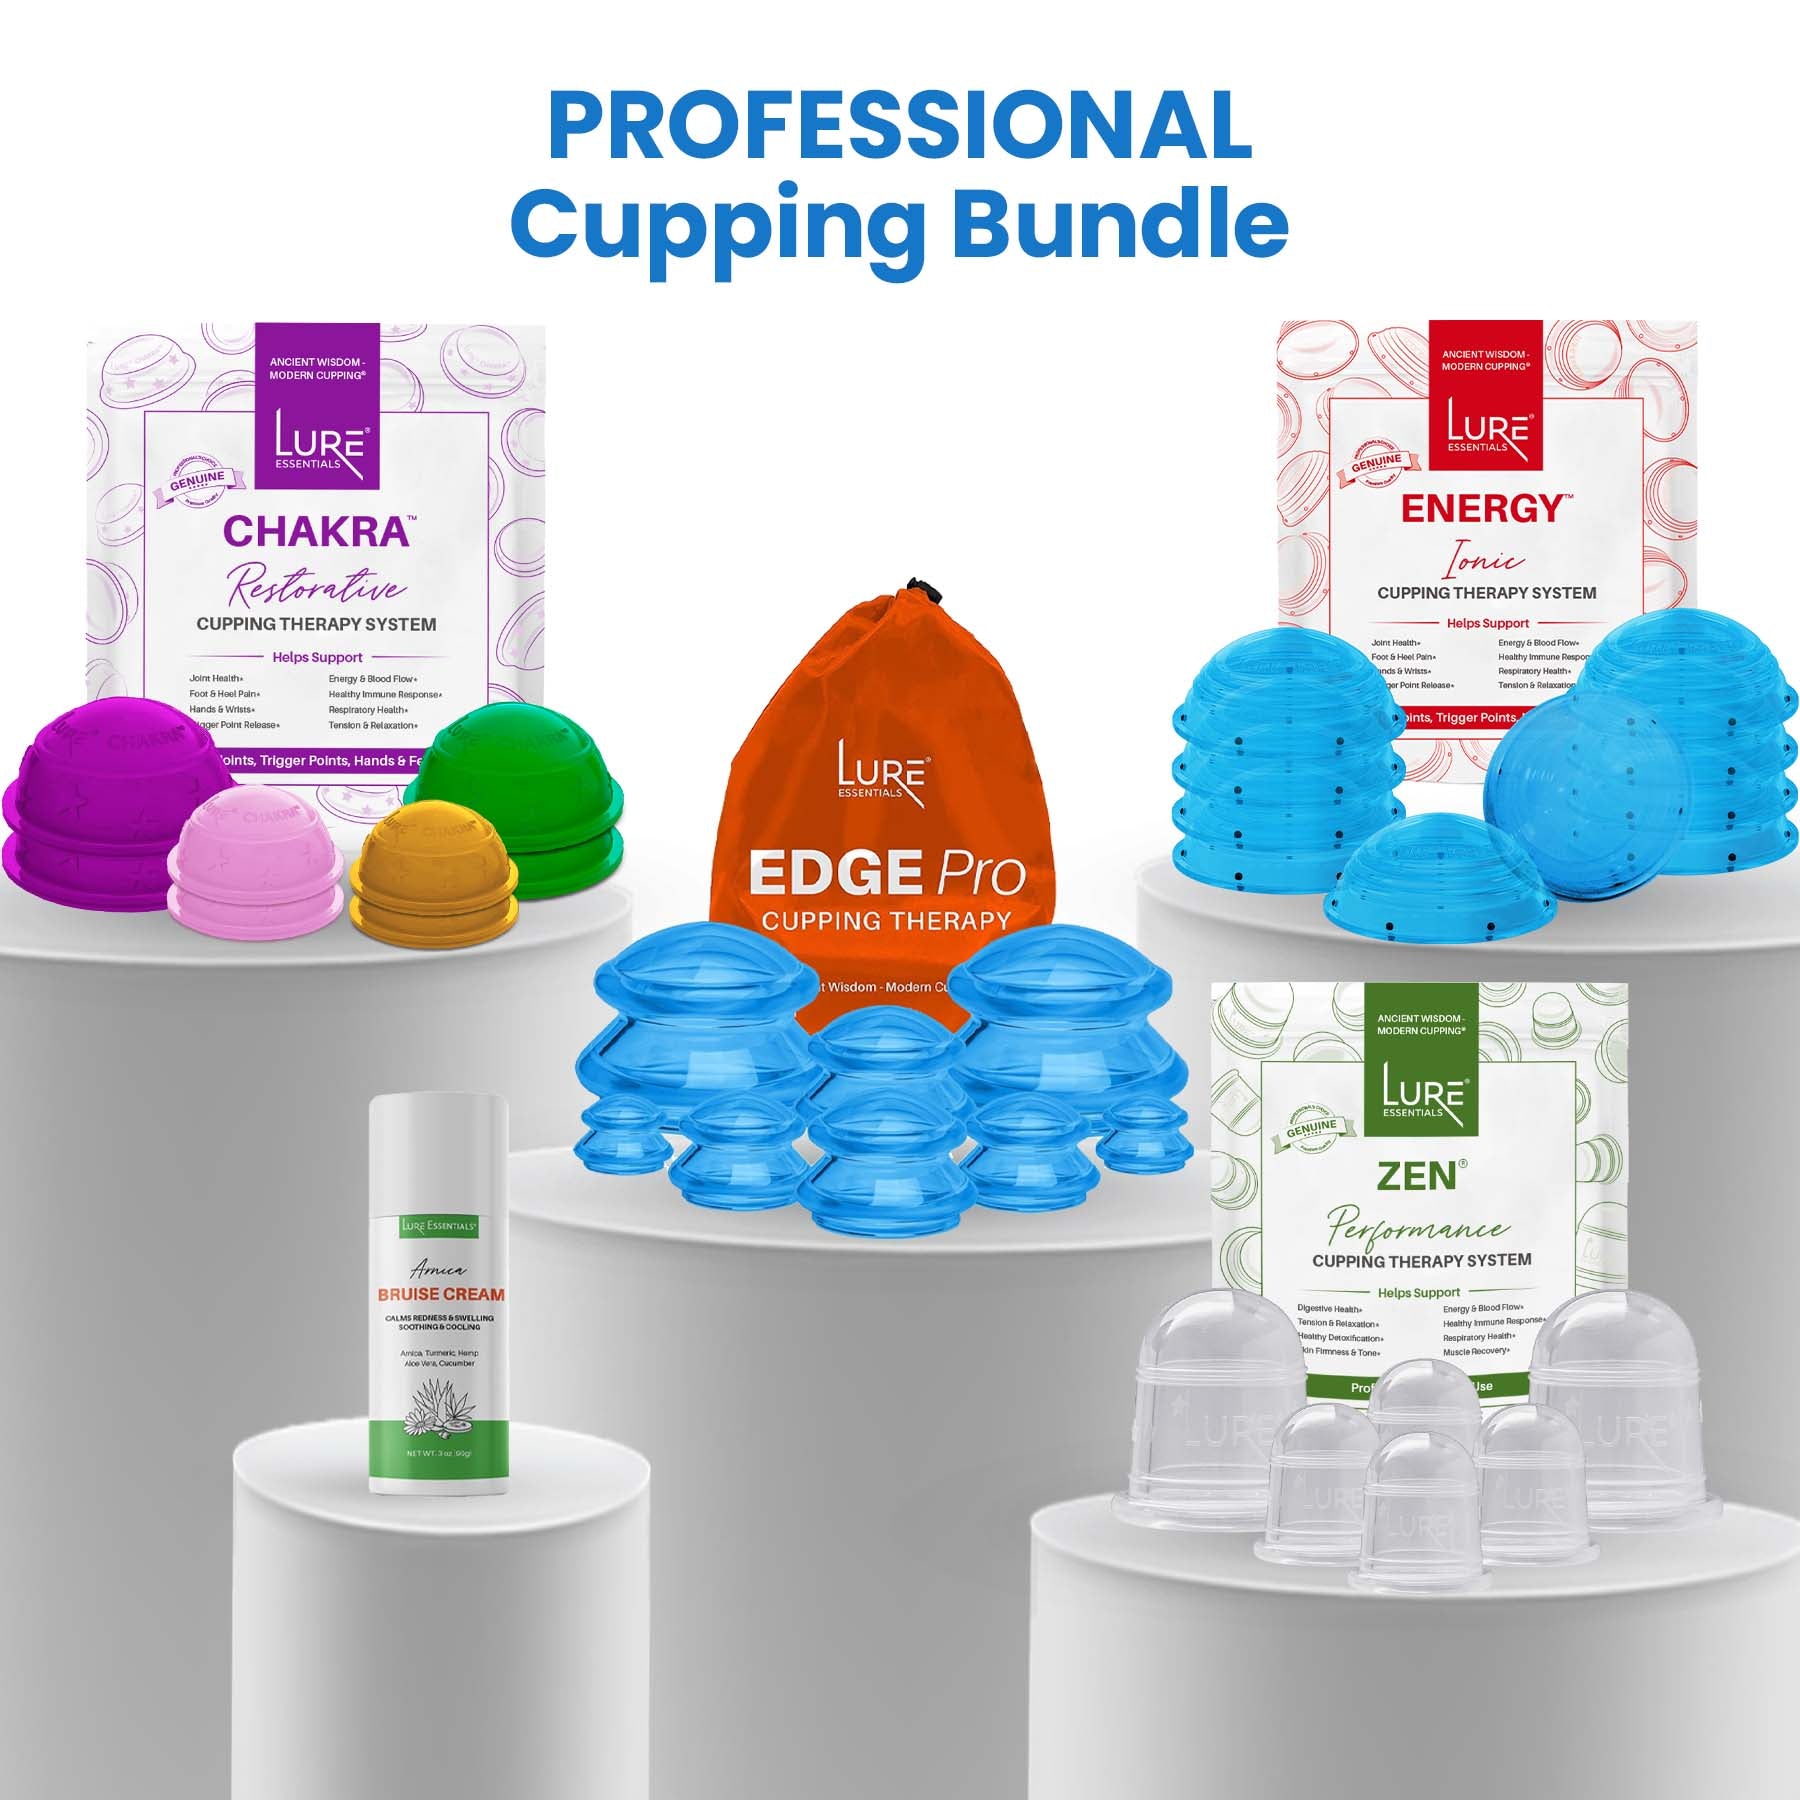 The PROFESSIONAL Cupping Therapy Bundle - Lure Essentials